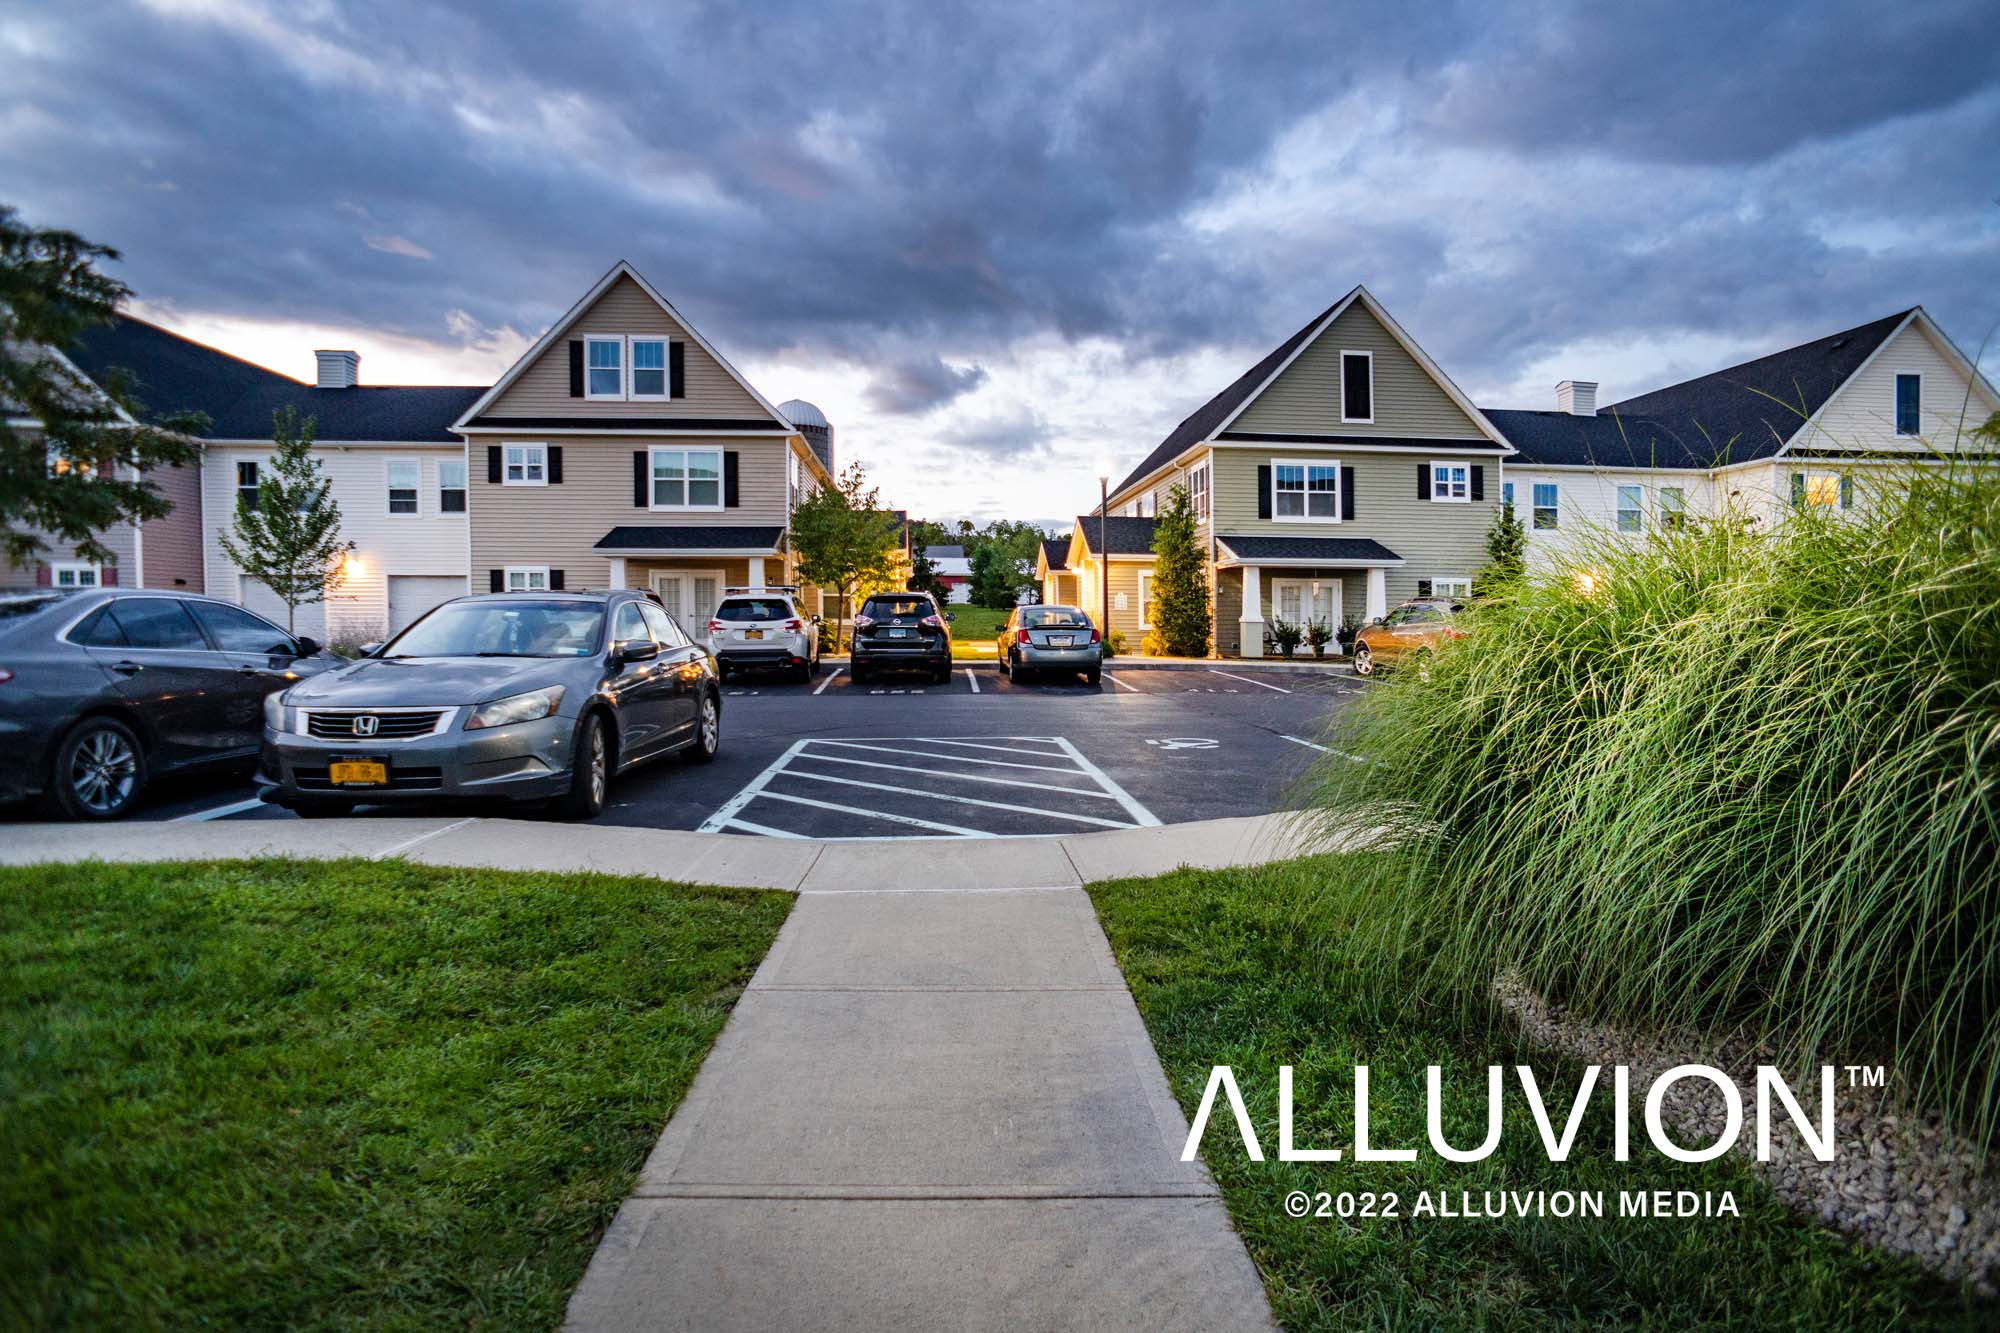 Hudson Valley Real Estate and Aerial Photography Galley – Brookside Meadows Luxury Rental Community in Pleasant Valley, NY – Real Estate Photography Project by Duncan Avenue Studios